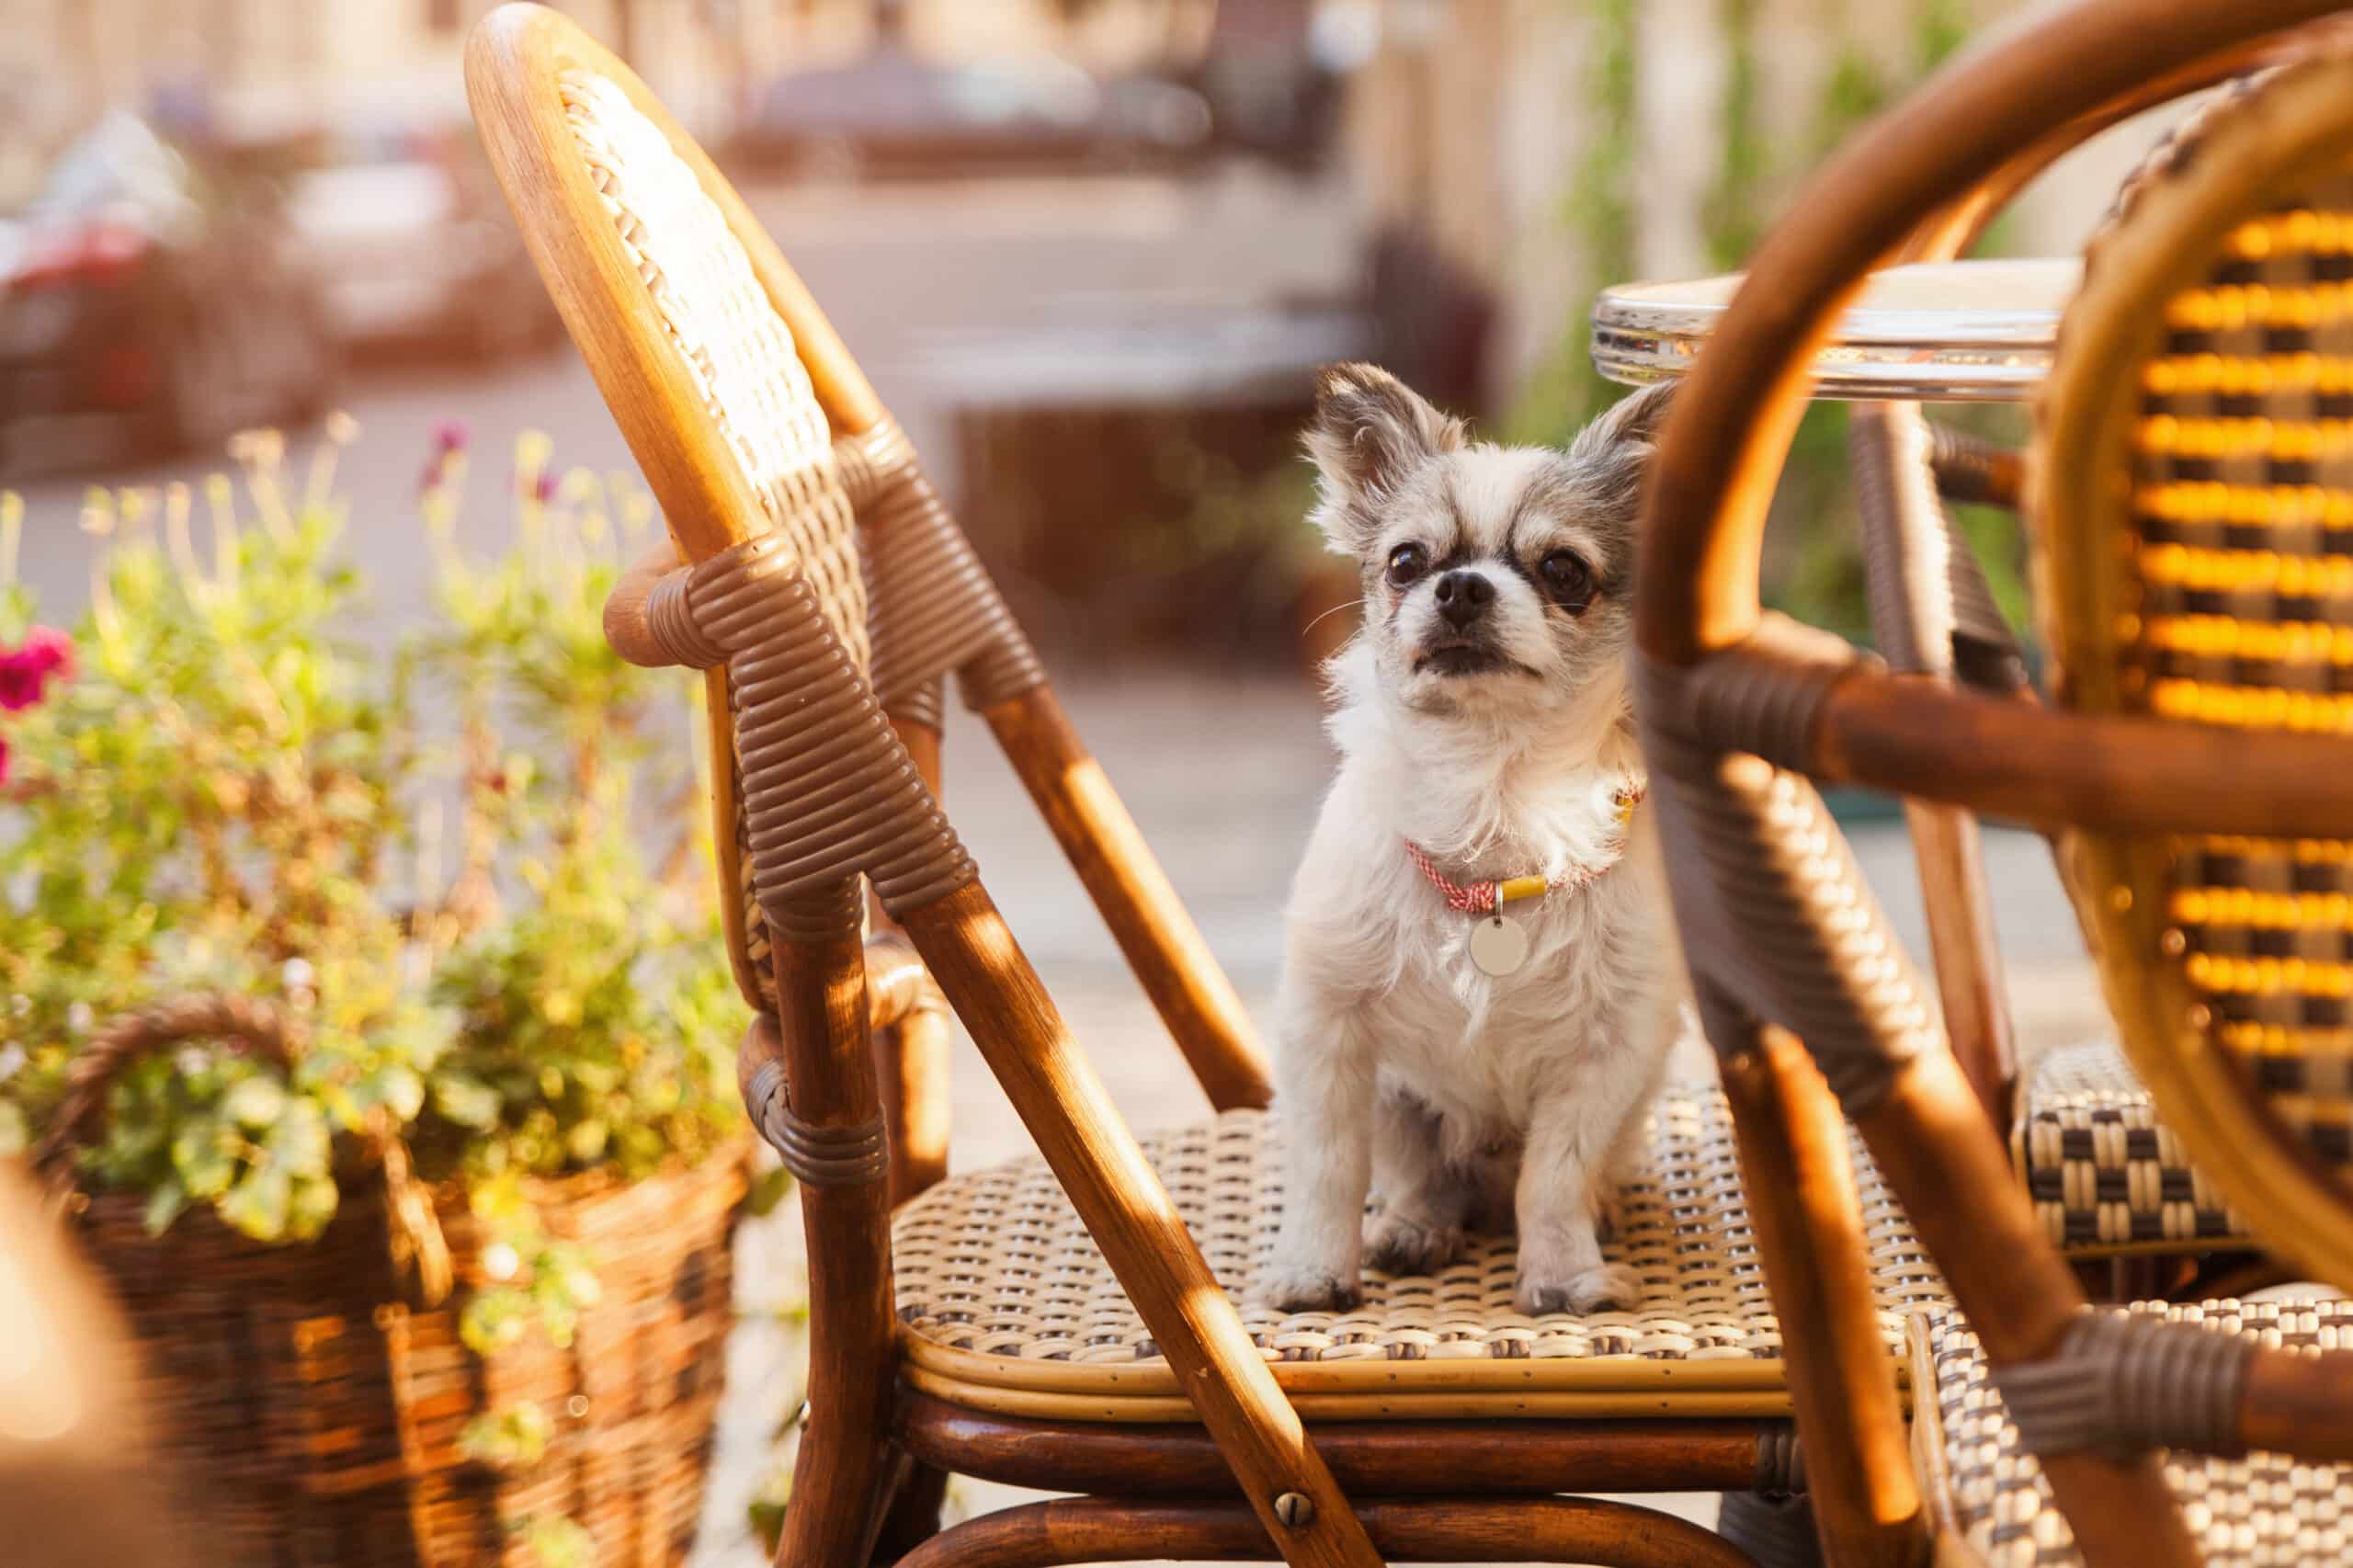 Cute chihuahua young dog in outdoors cafe with chairs and green plants and flowers in pots in old city downtown. Summer morning solar bright effect. Pets friendly vacations travel concept.